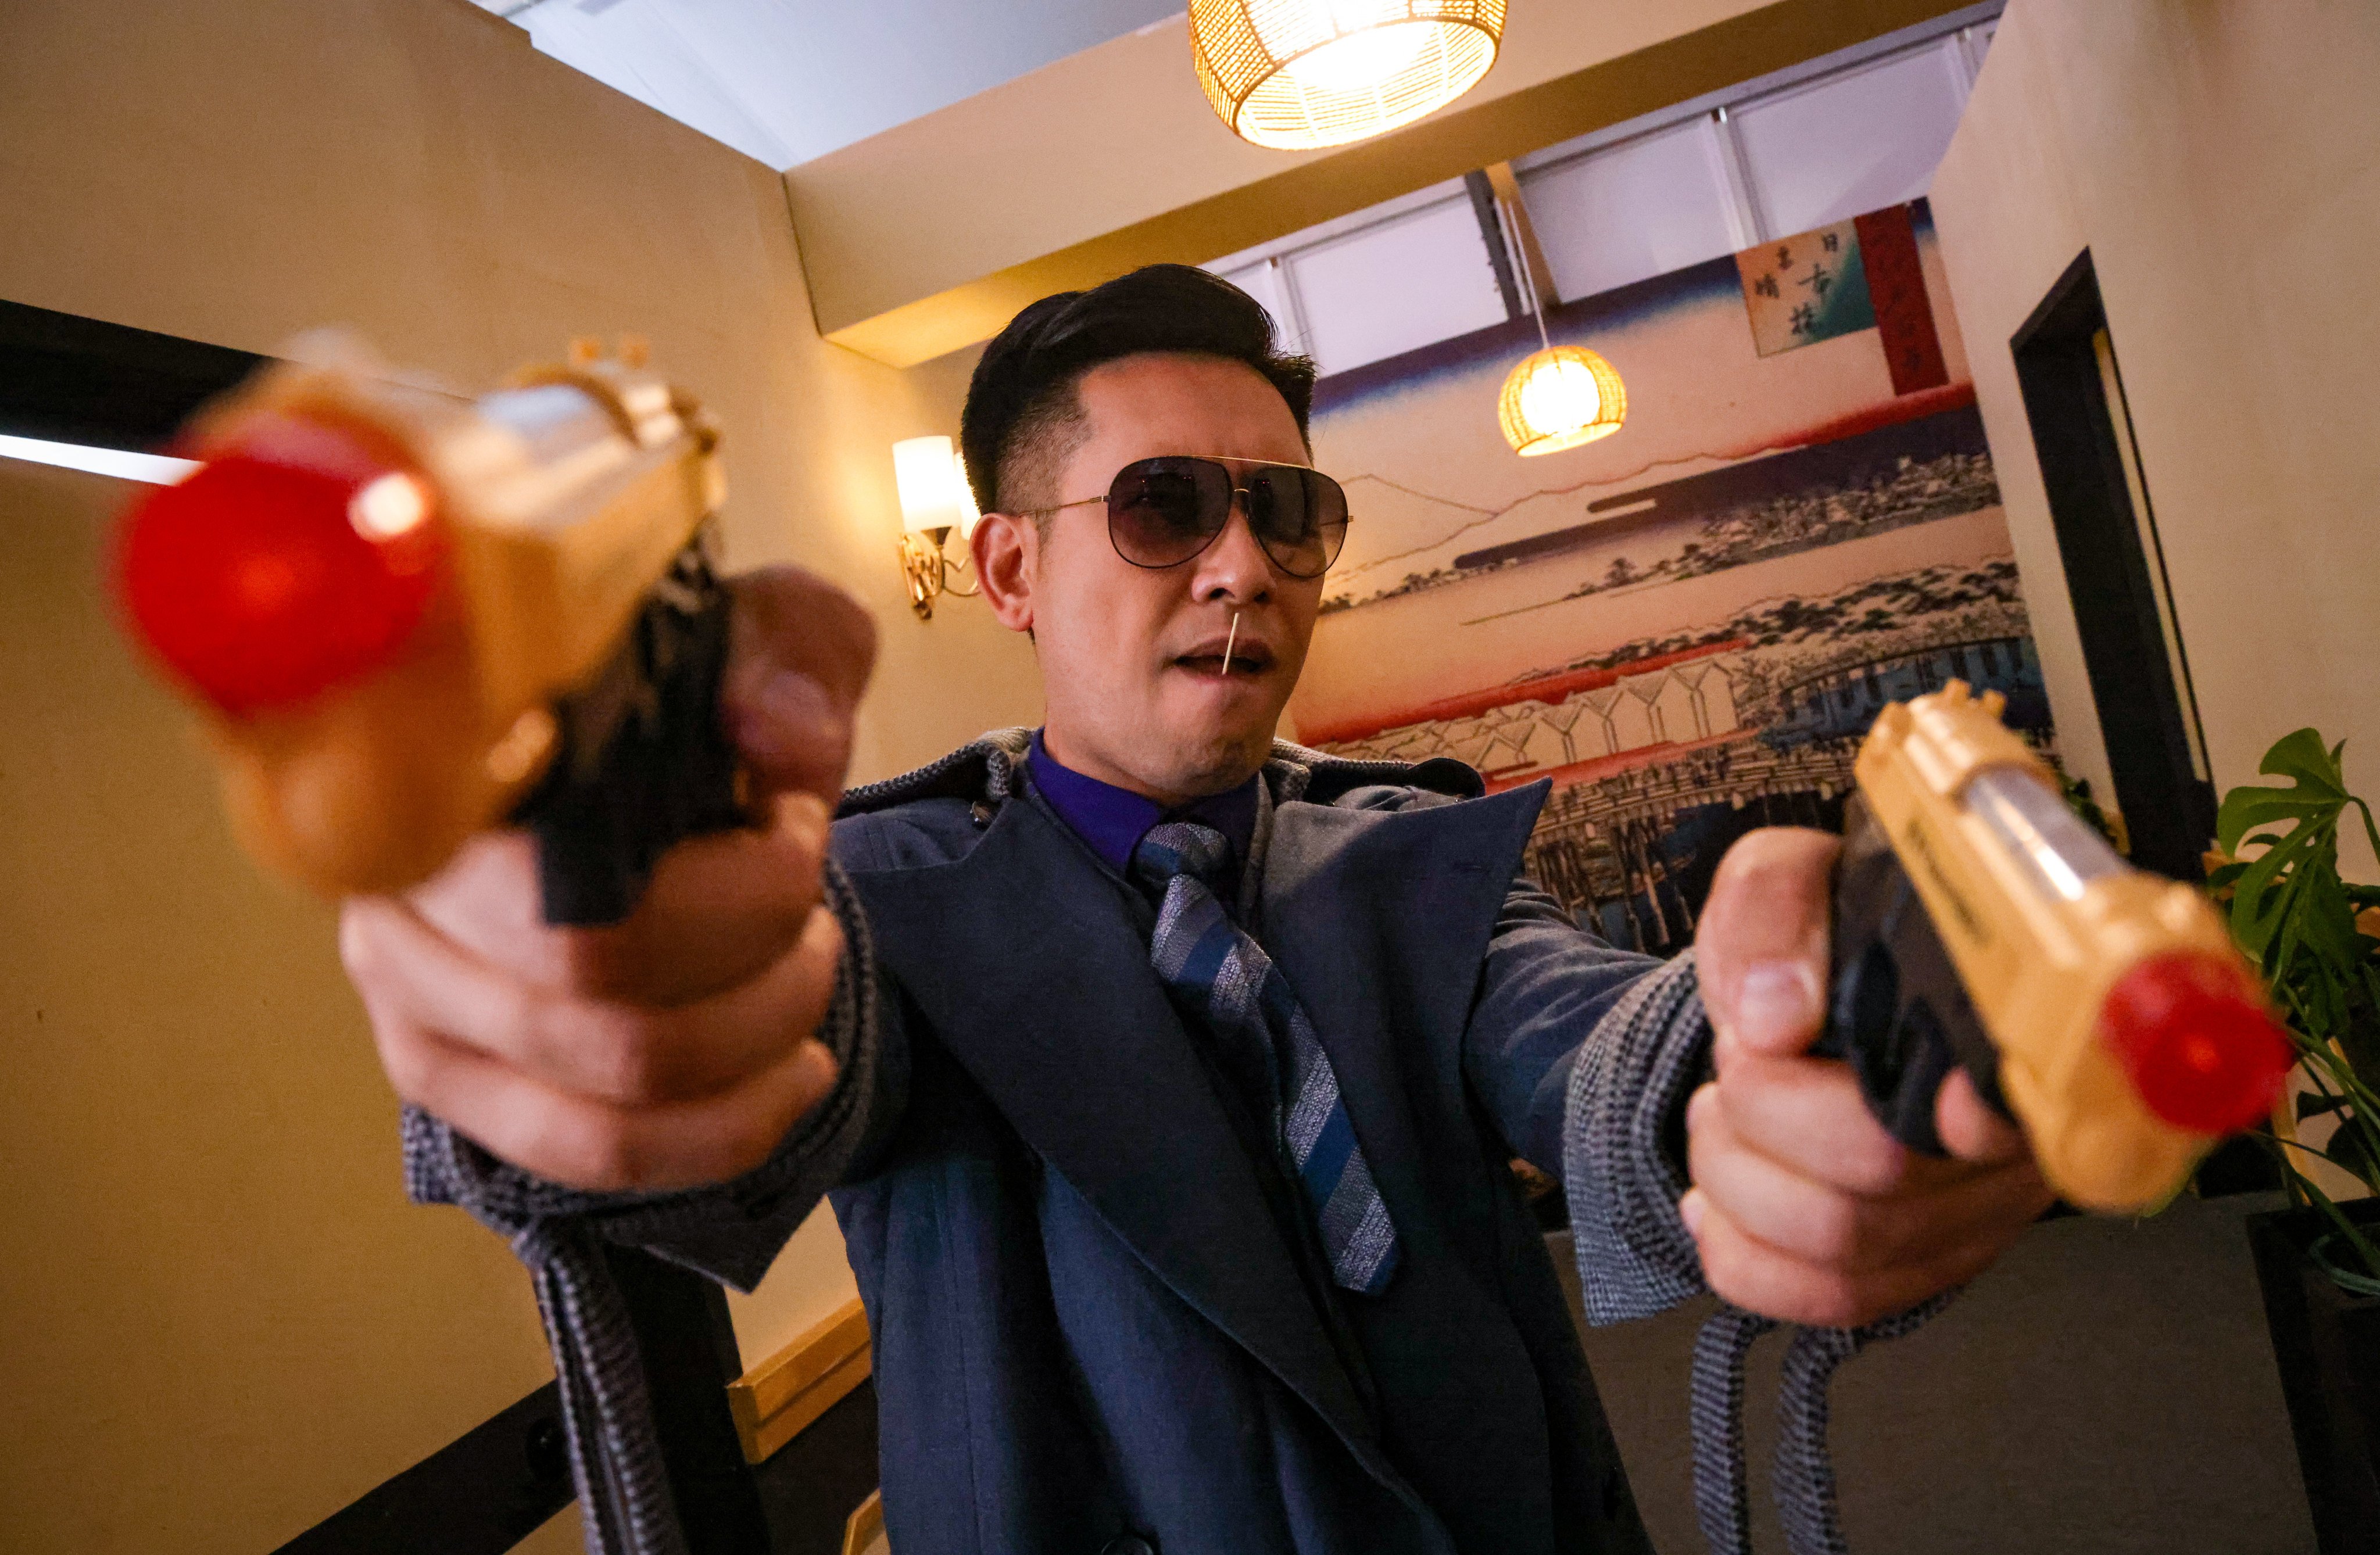 An actor recreates a scene from the classic Hong Kong film A Better Tomorrow as part of a promotional event for the festival. Photo: Dickson Lee